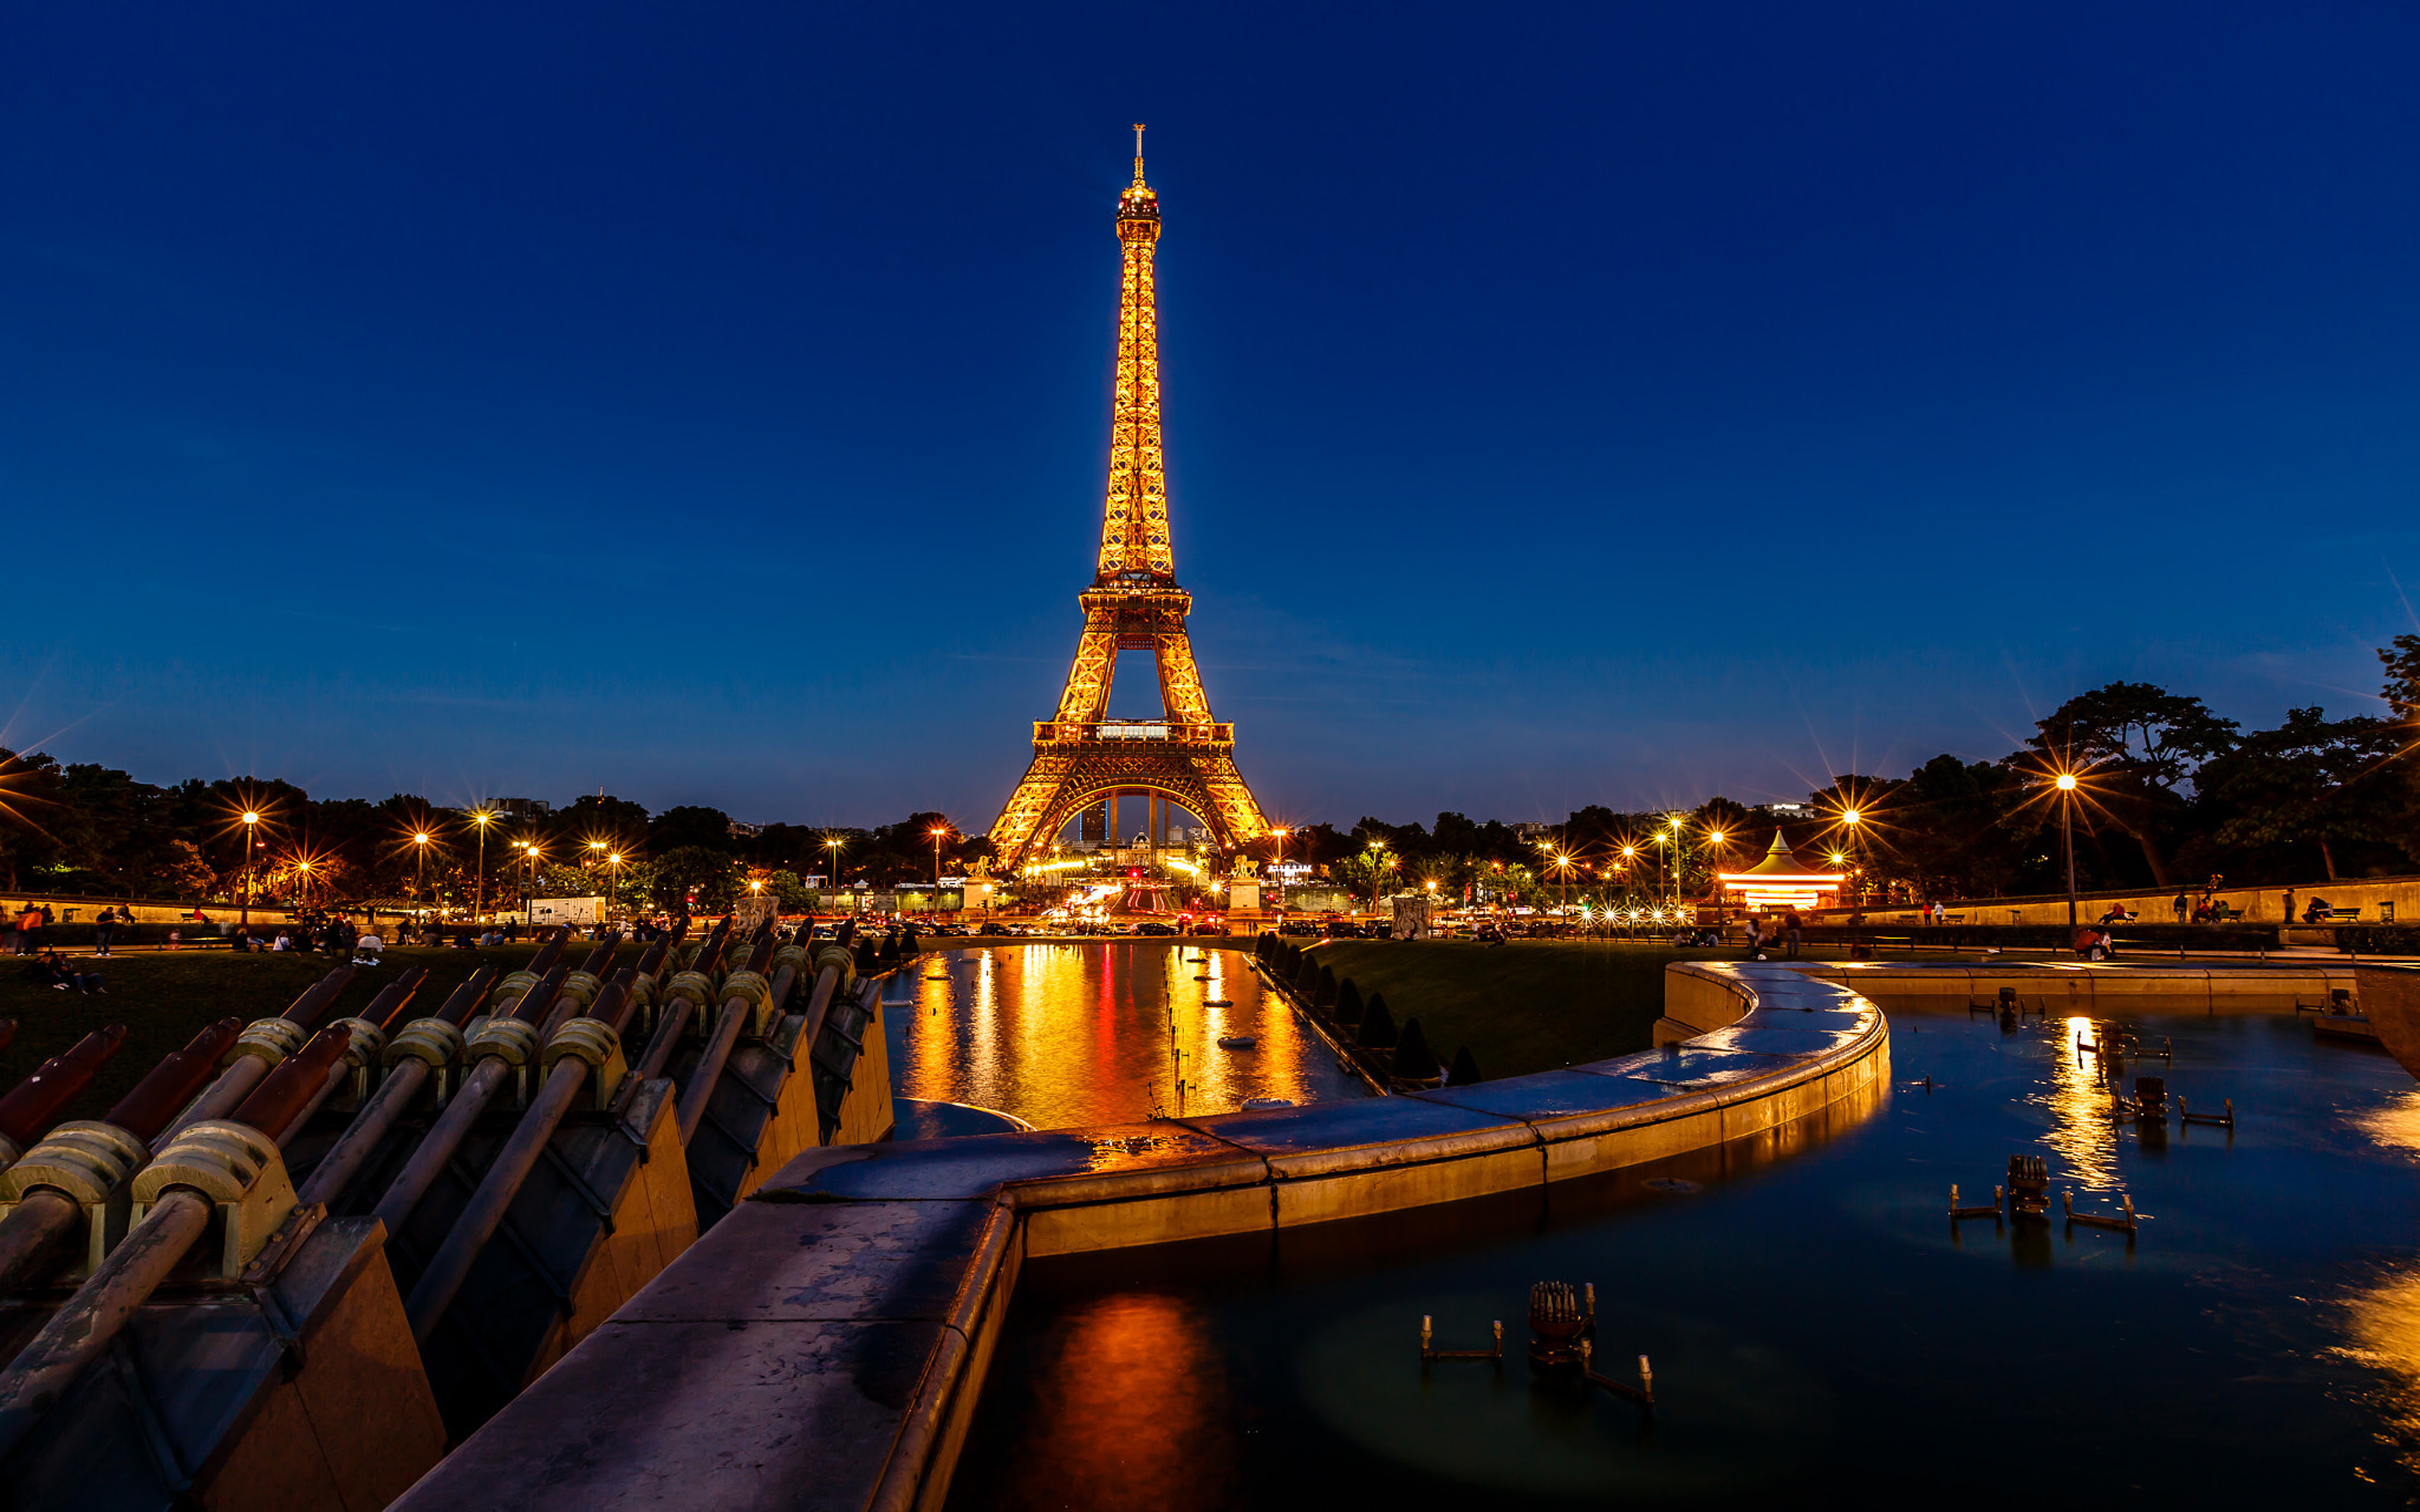 Trocadero Fountains In The Evening And Eiffel Tower Paris  